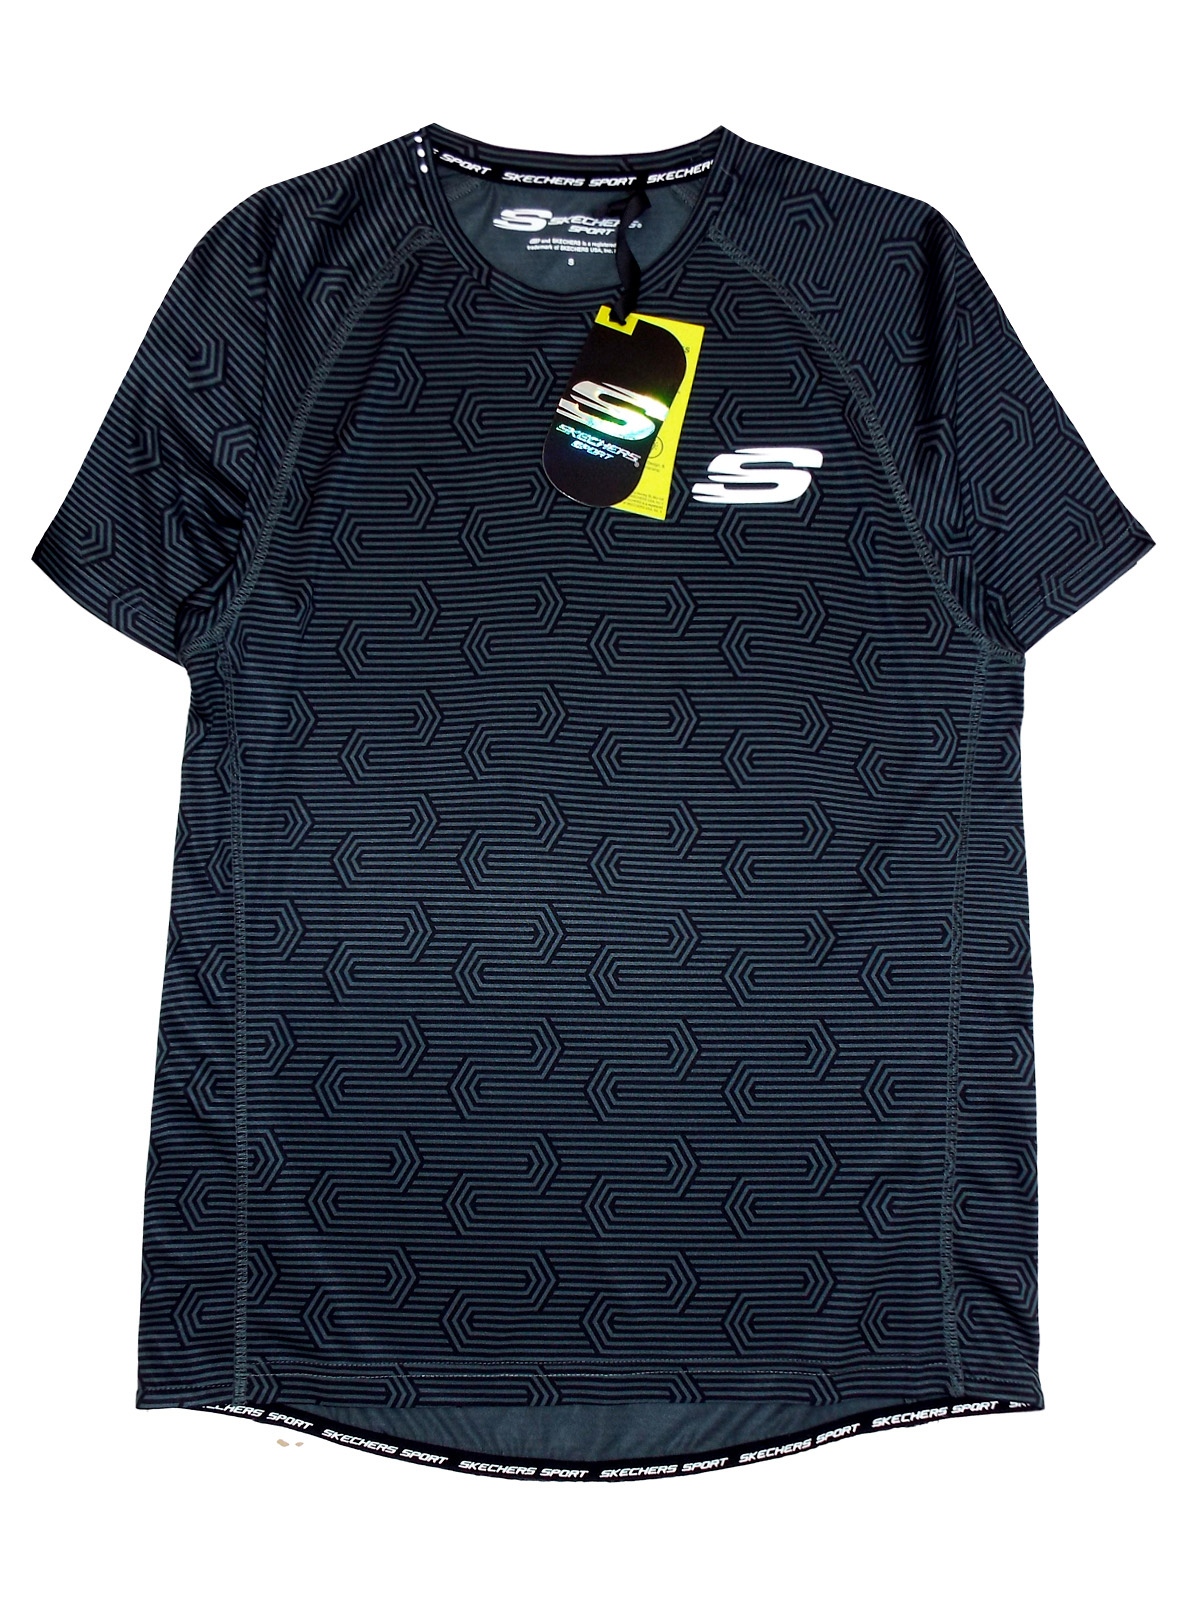 Skechers - - Skechers BLACK Aeon Printed Sports T-Shirt - Size Small to ...